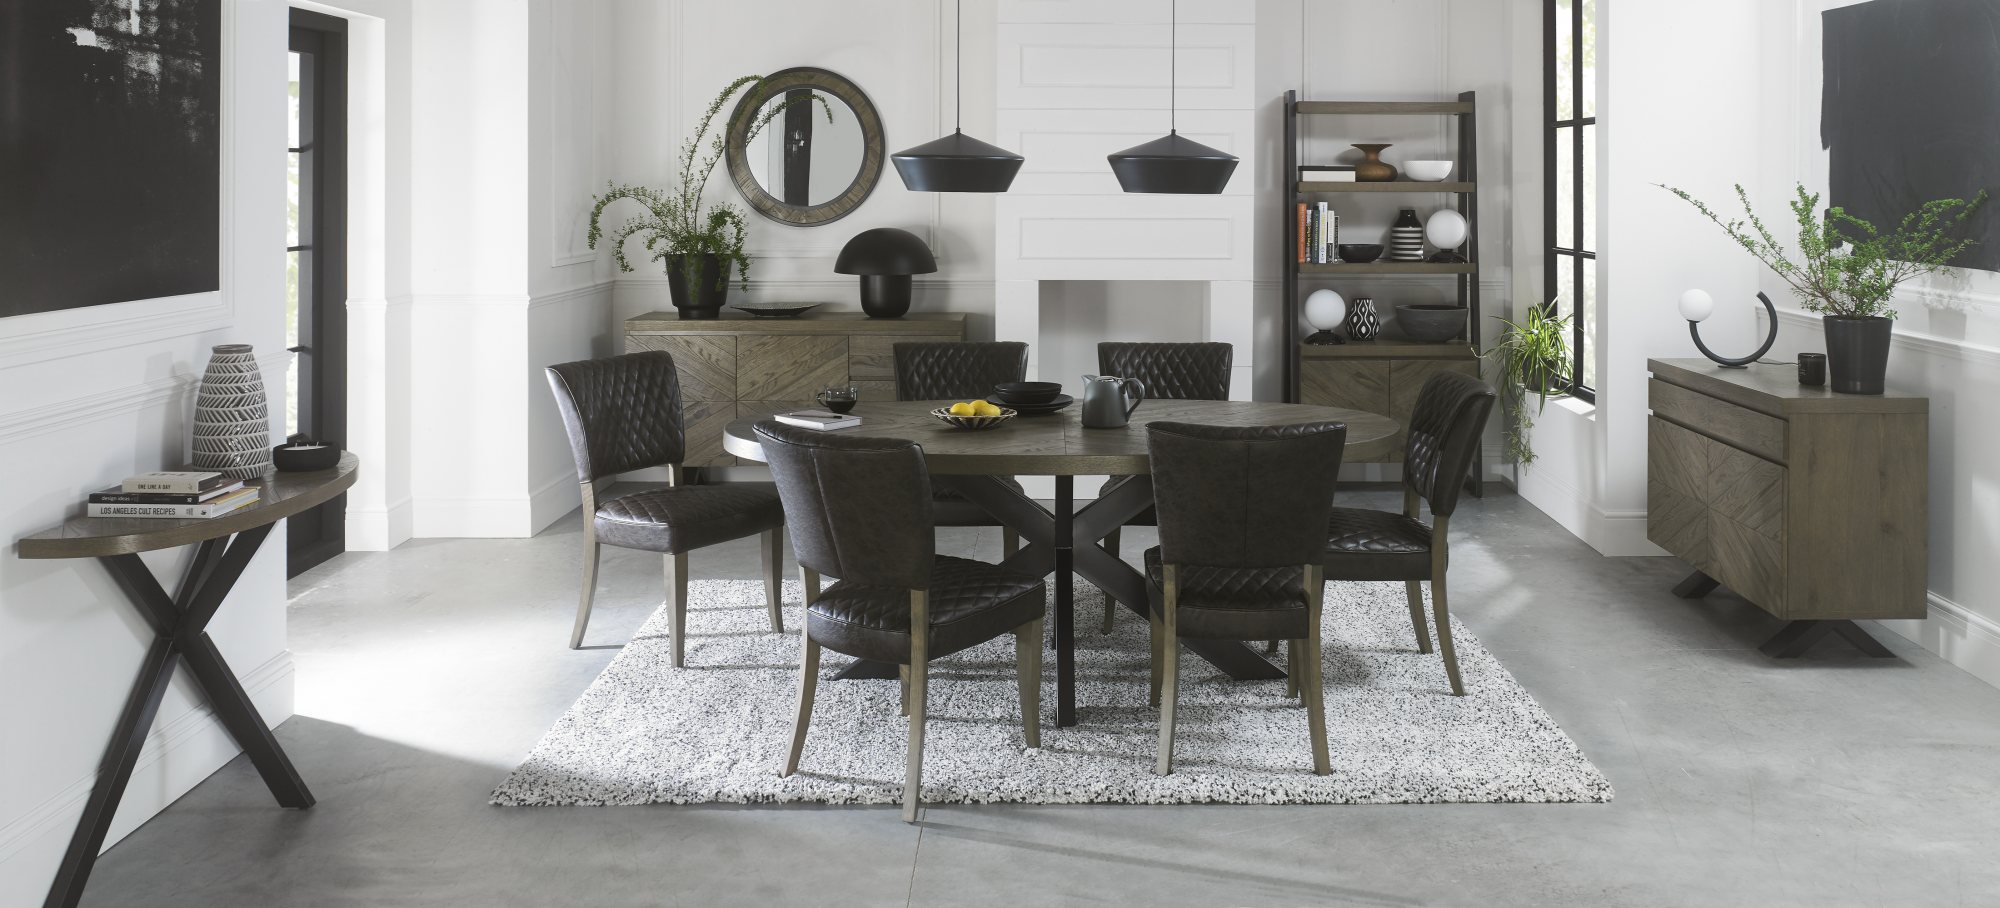 Home Origins Bosco Fumed Oak 6 Seater Dining Table & 6 Constable Fumed Oak Upholstered Chairs- Old West Vintage- lifestyle